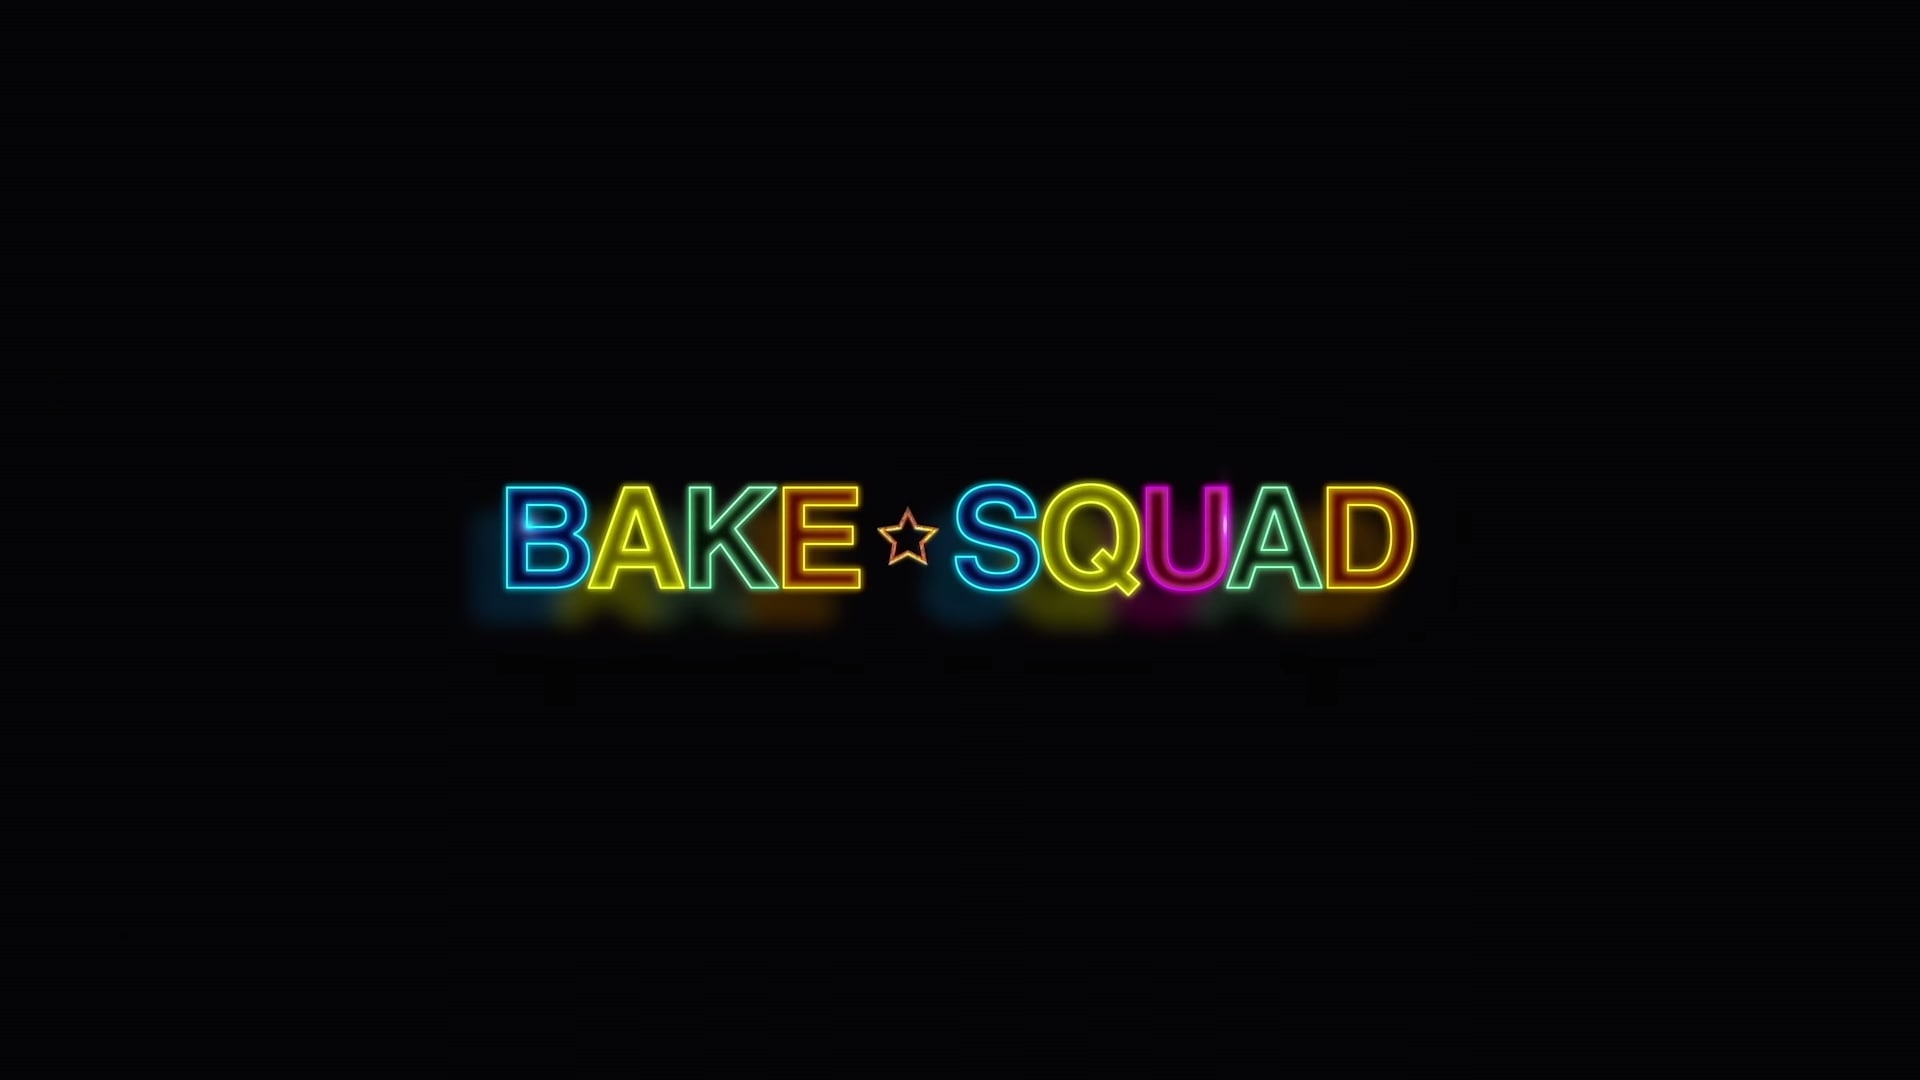 Netflix Bake Squad Season 1 Trailer, Coming to Netflix in August 2021